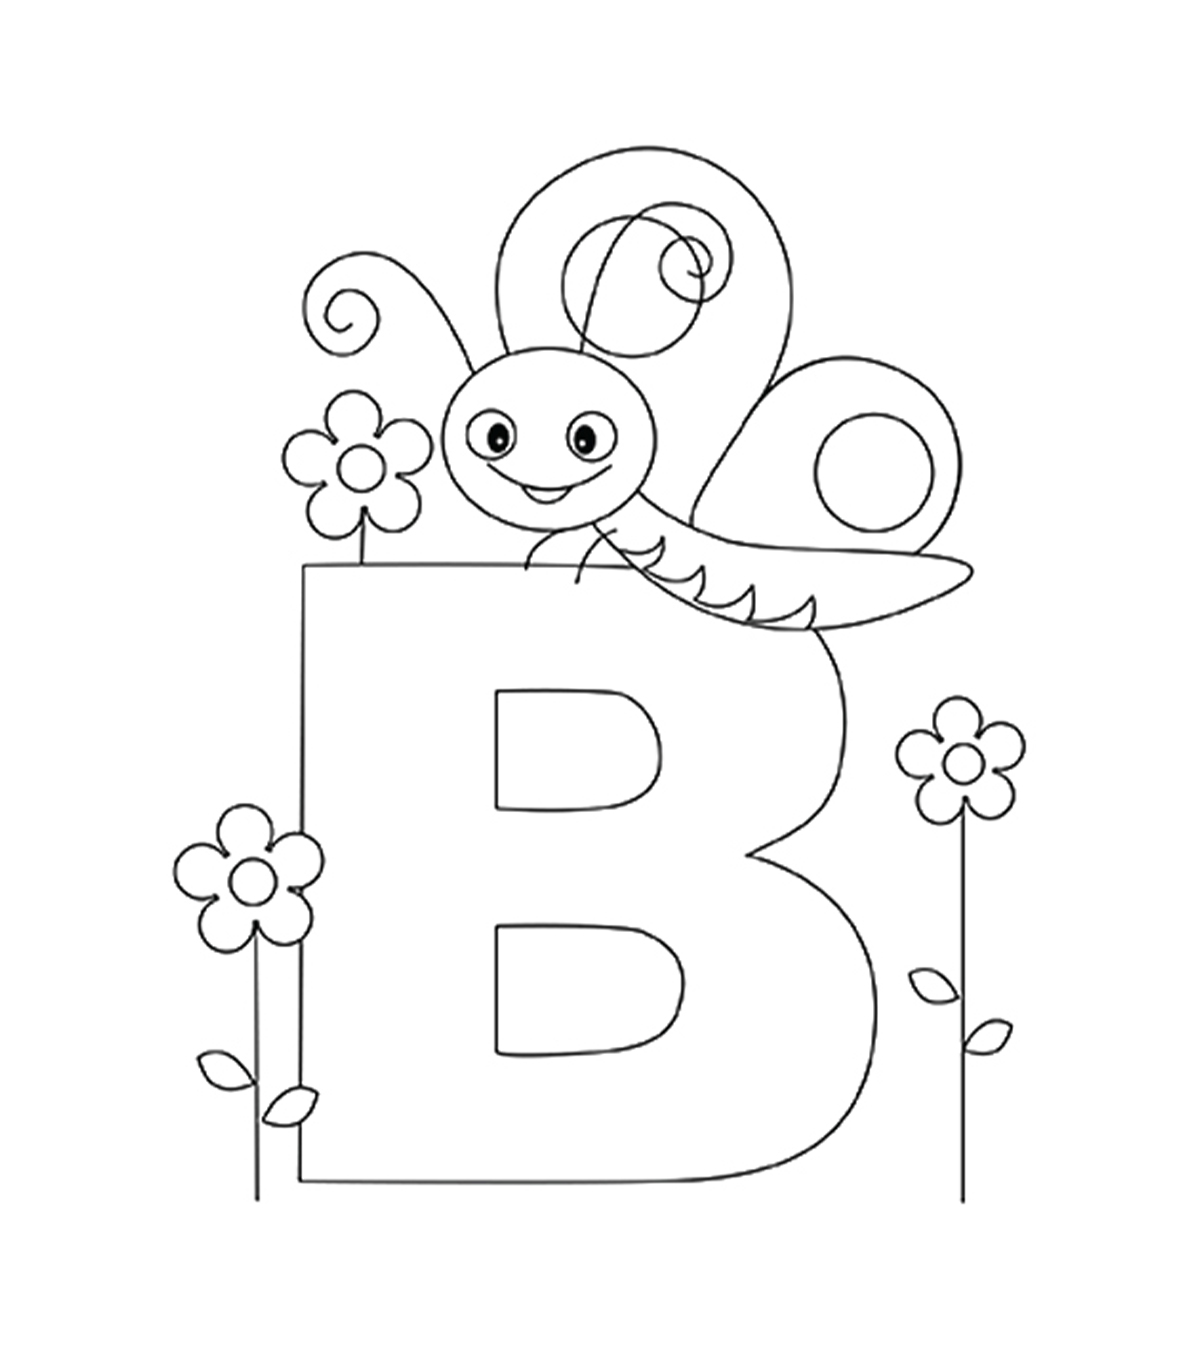 Coloring Worksheets For Nursery - Coloring Ideas